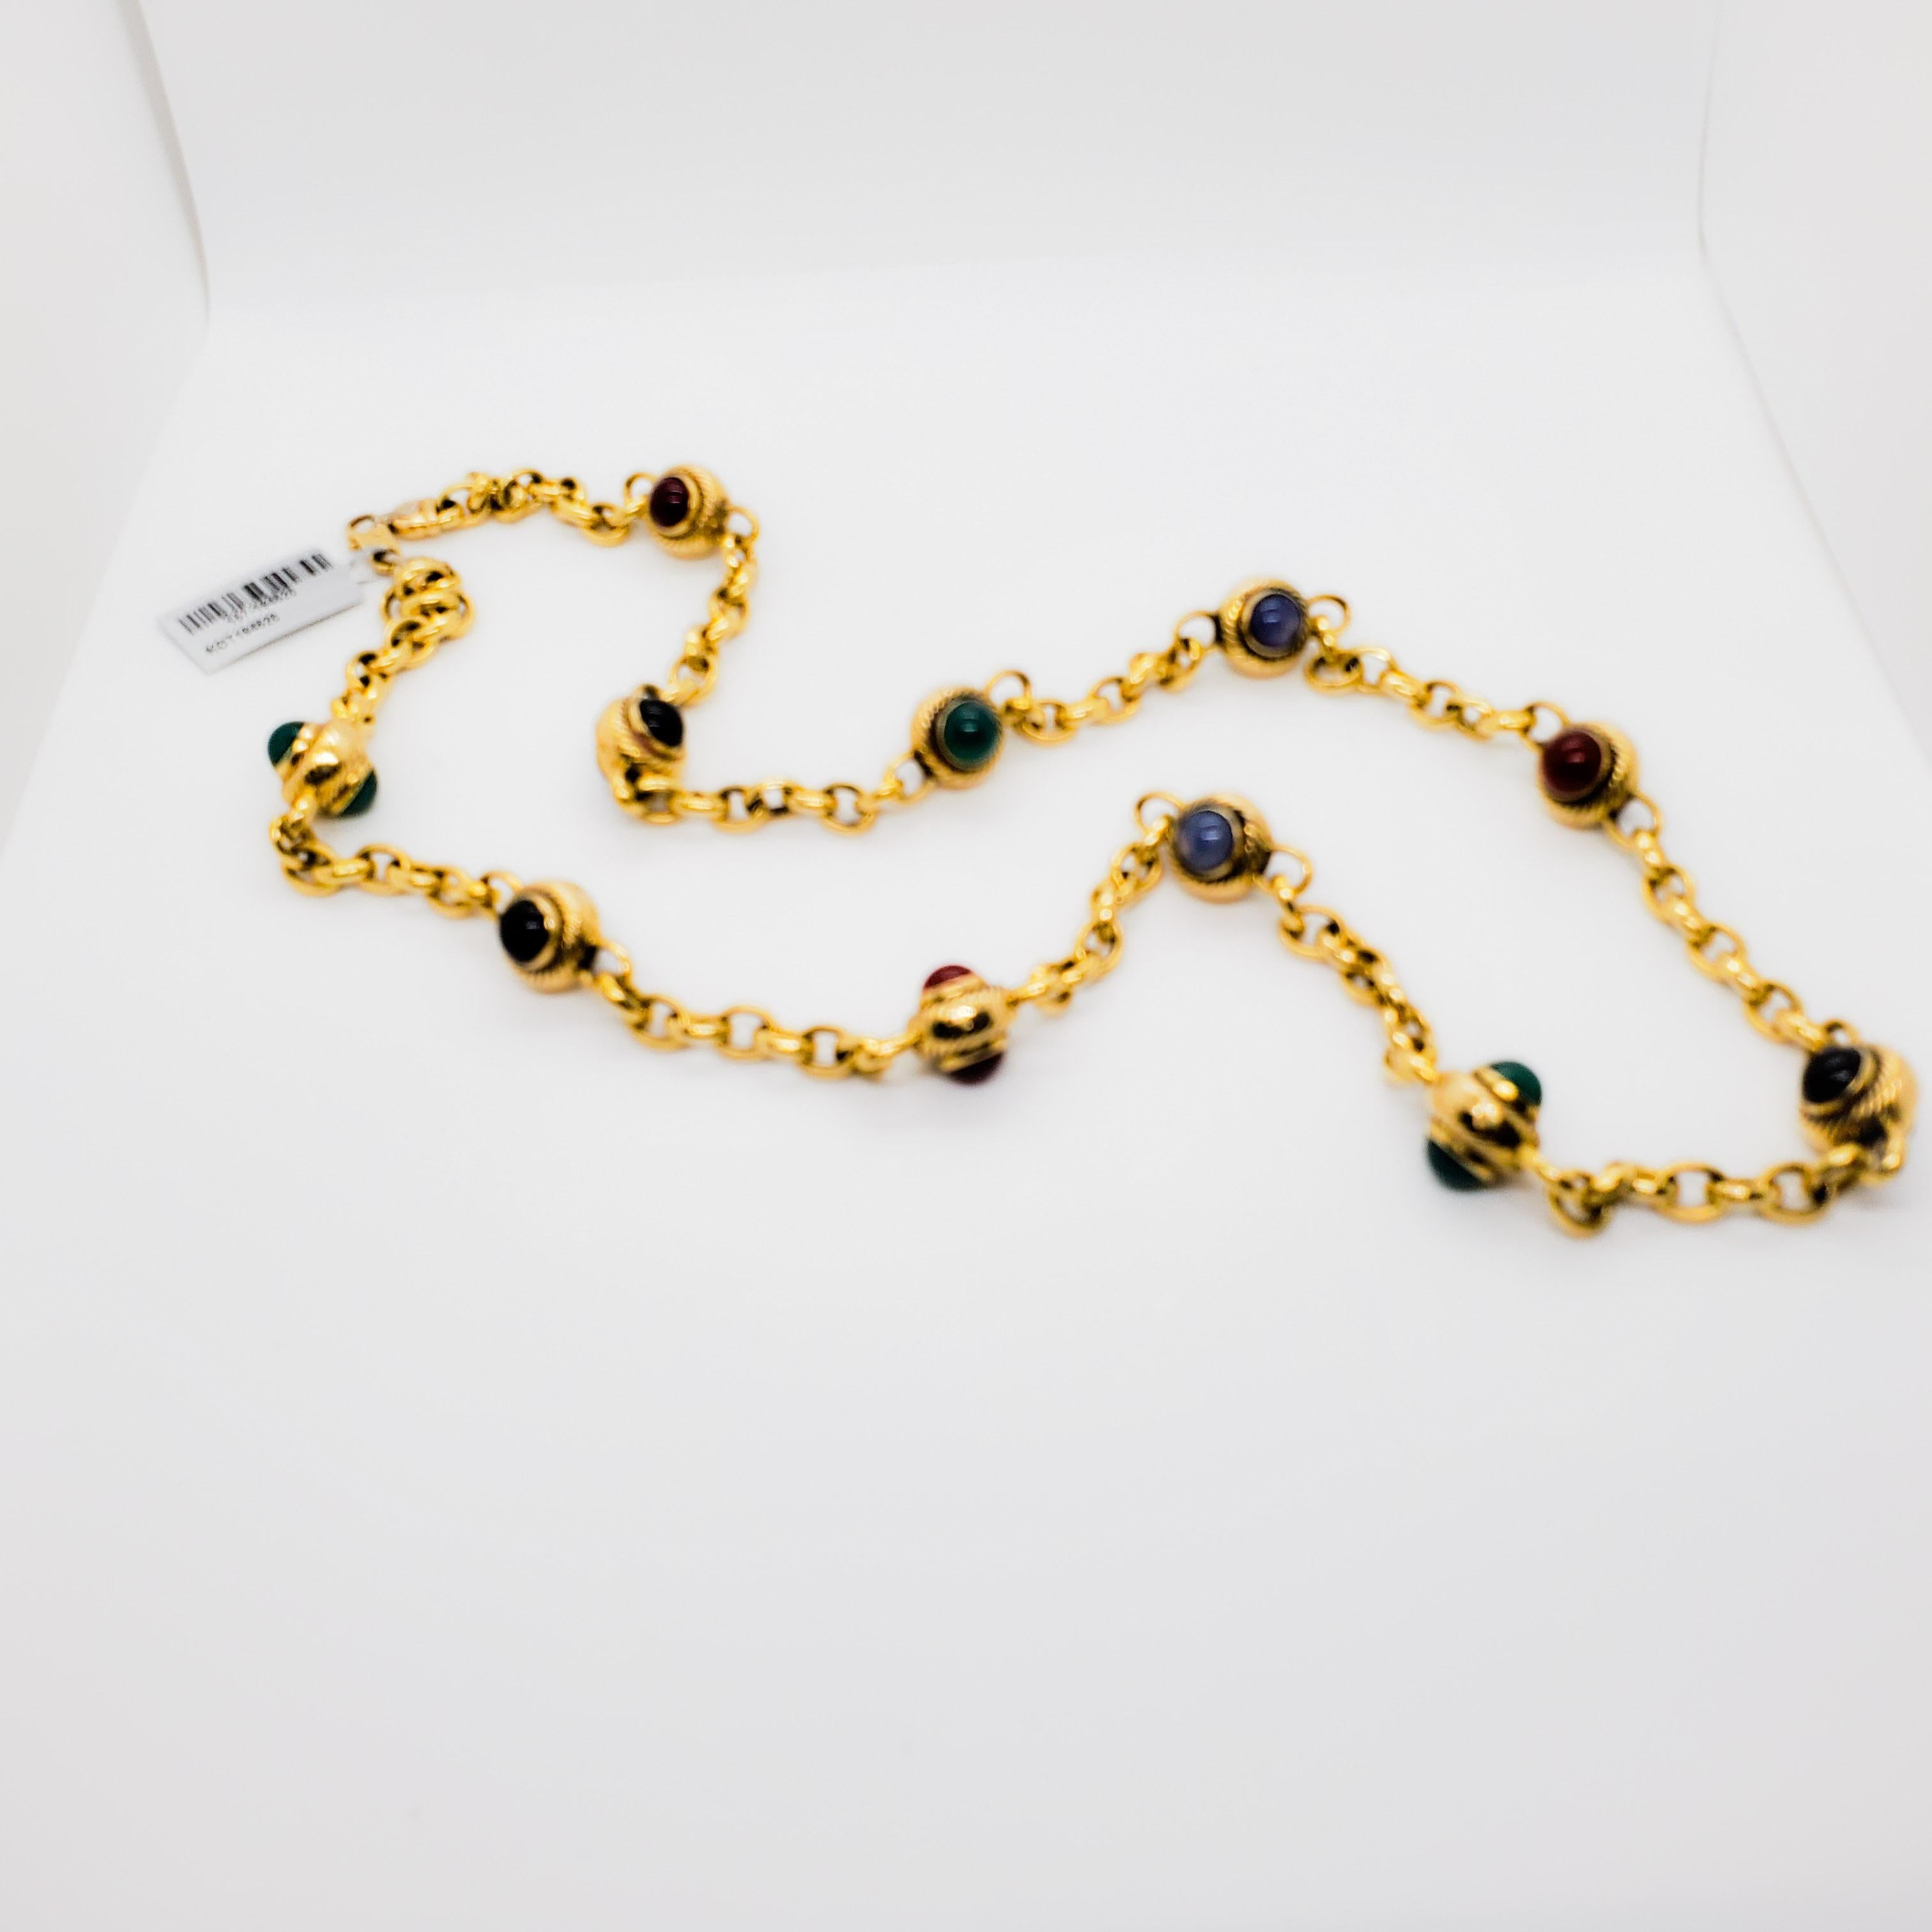 Gorgeous estate chain necklace featuring 120.60 grams of gold with cabochons of various stones like blue chalcedony, cornelian chysophase, and onyx. Chunky layered look with a classy touch.